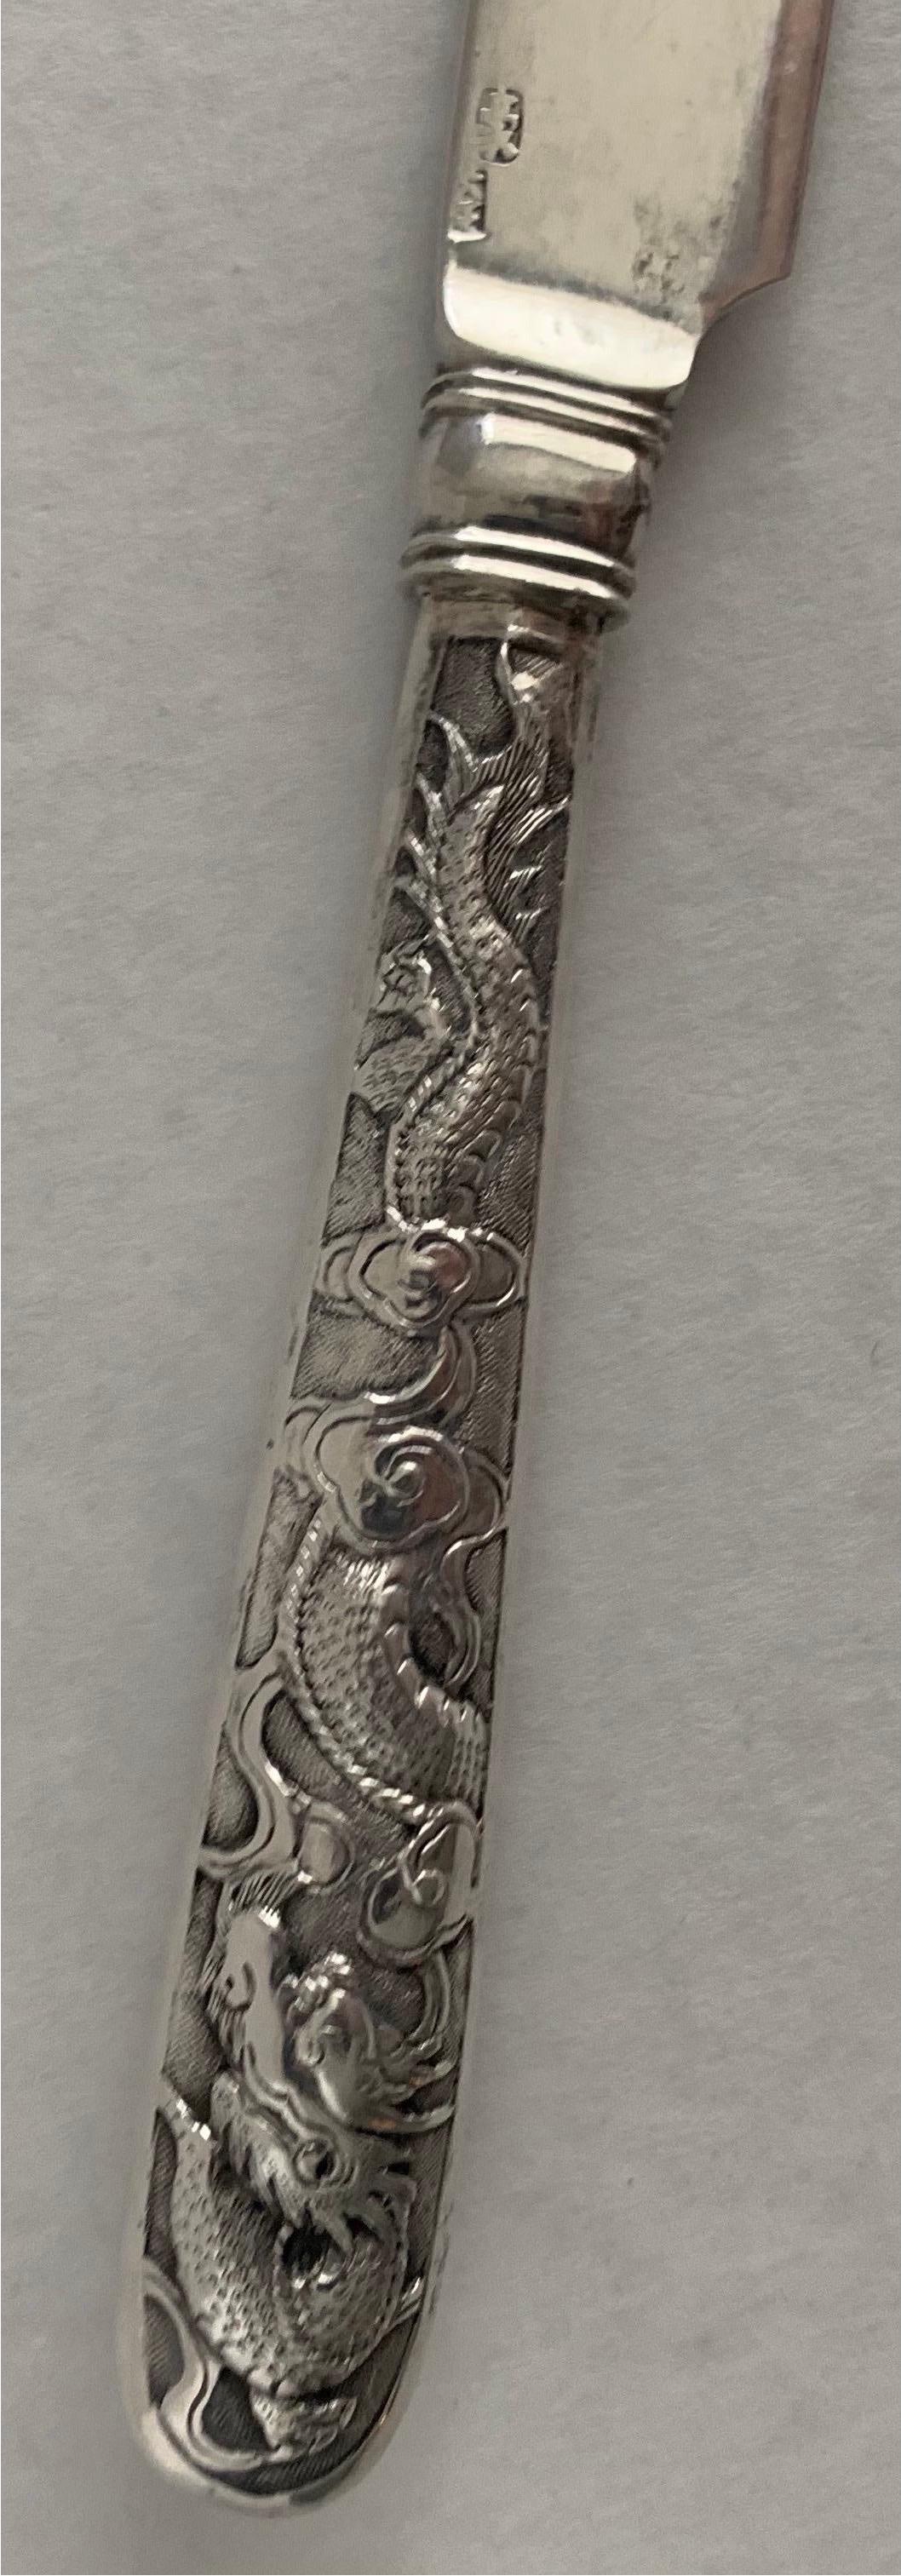 Chinese Export silver dinner knife. Overall motif on the handle of dragons with clouds. Single knife could also be used as a letter opener. Stamped markings on the blade.